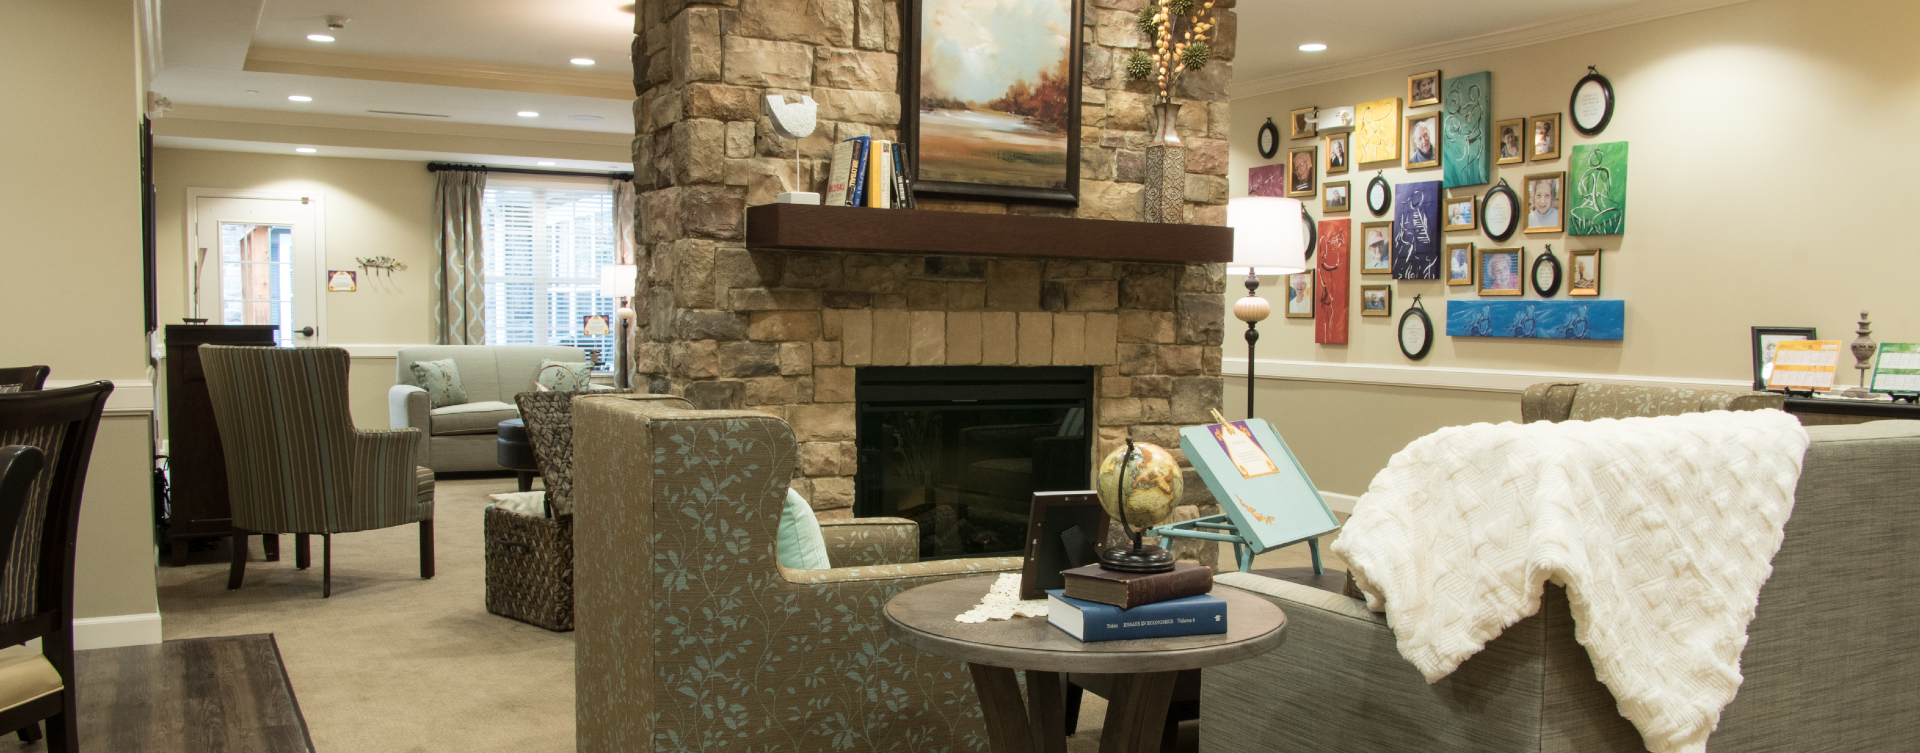 Residents can enjoy furniture covered in cozy fabrics in the Mary B’s living room at Bickford of Spotsylvania